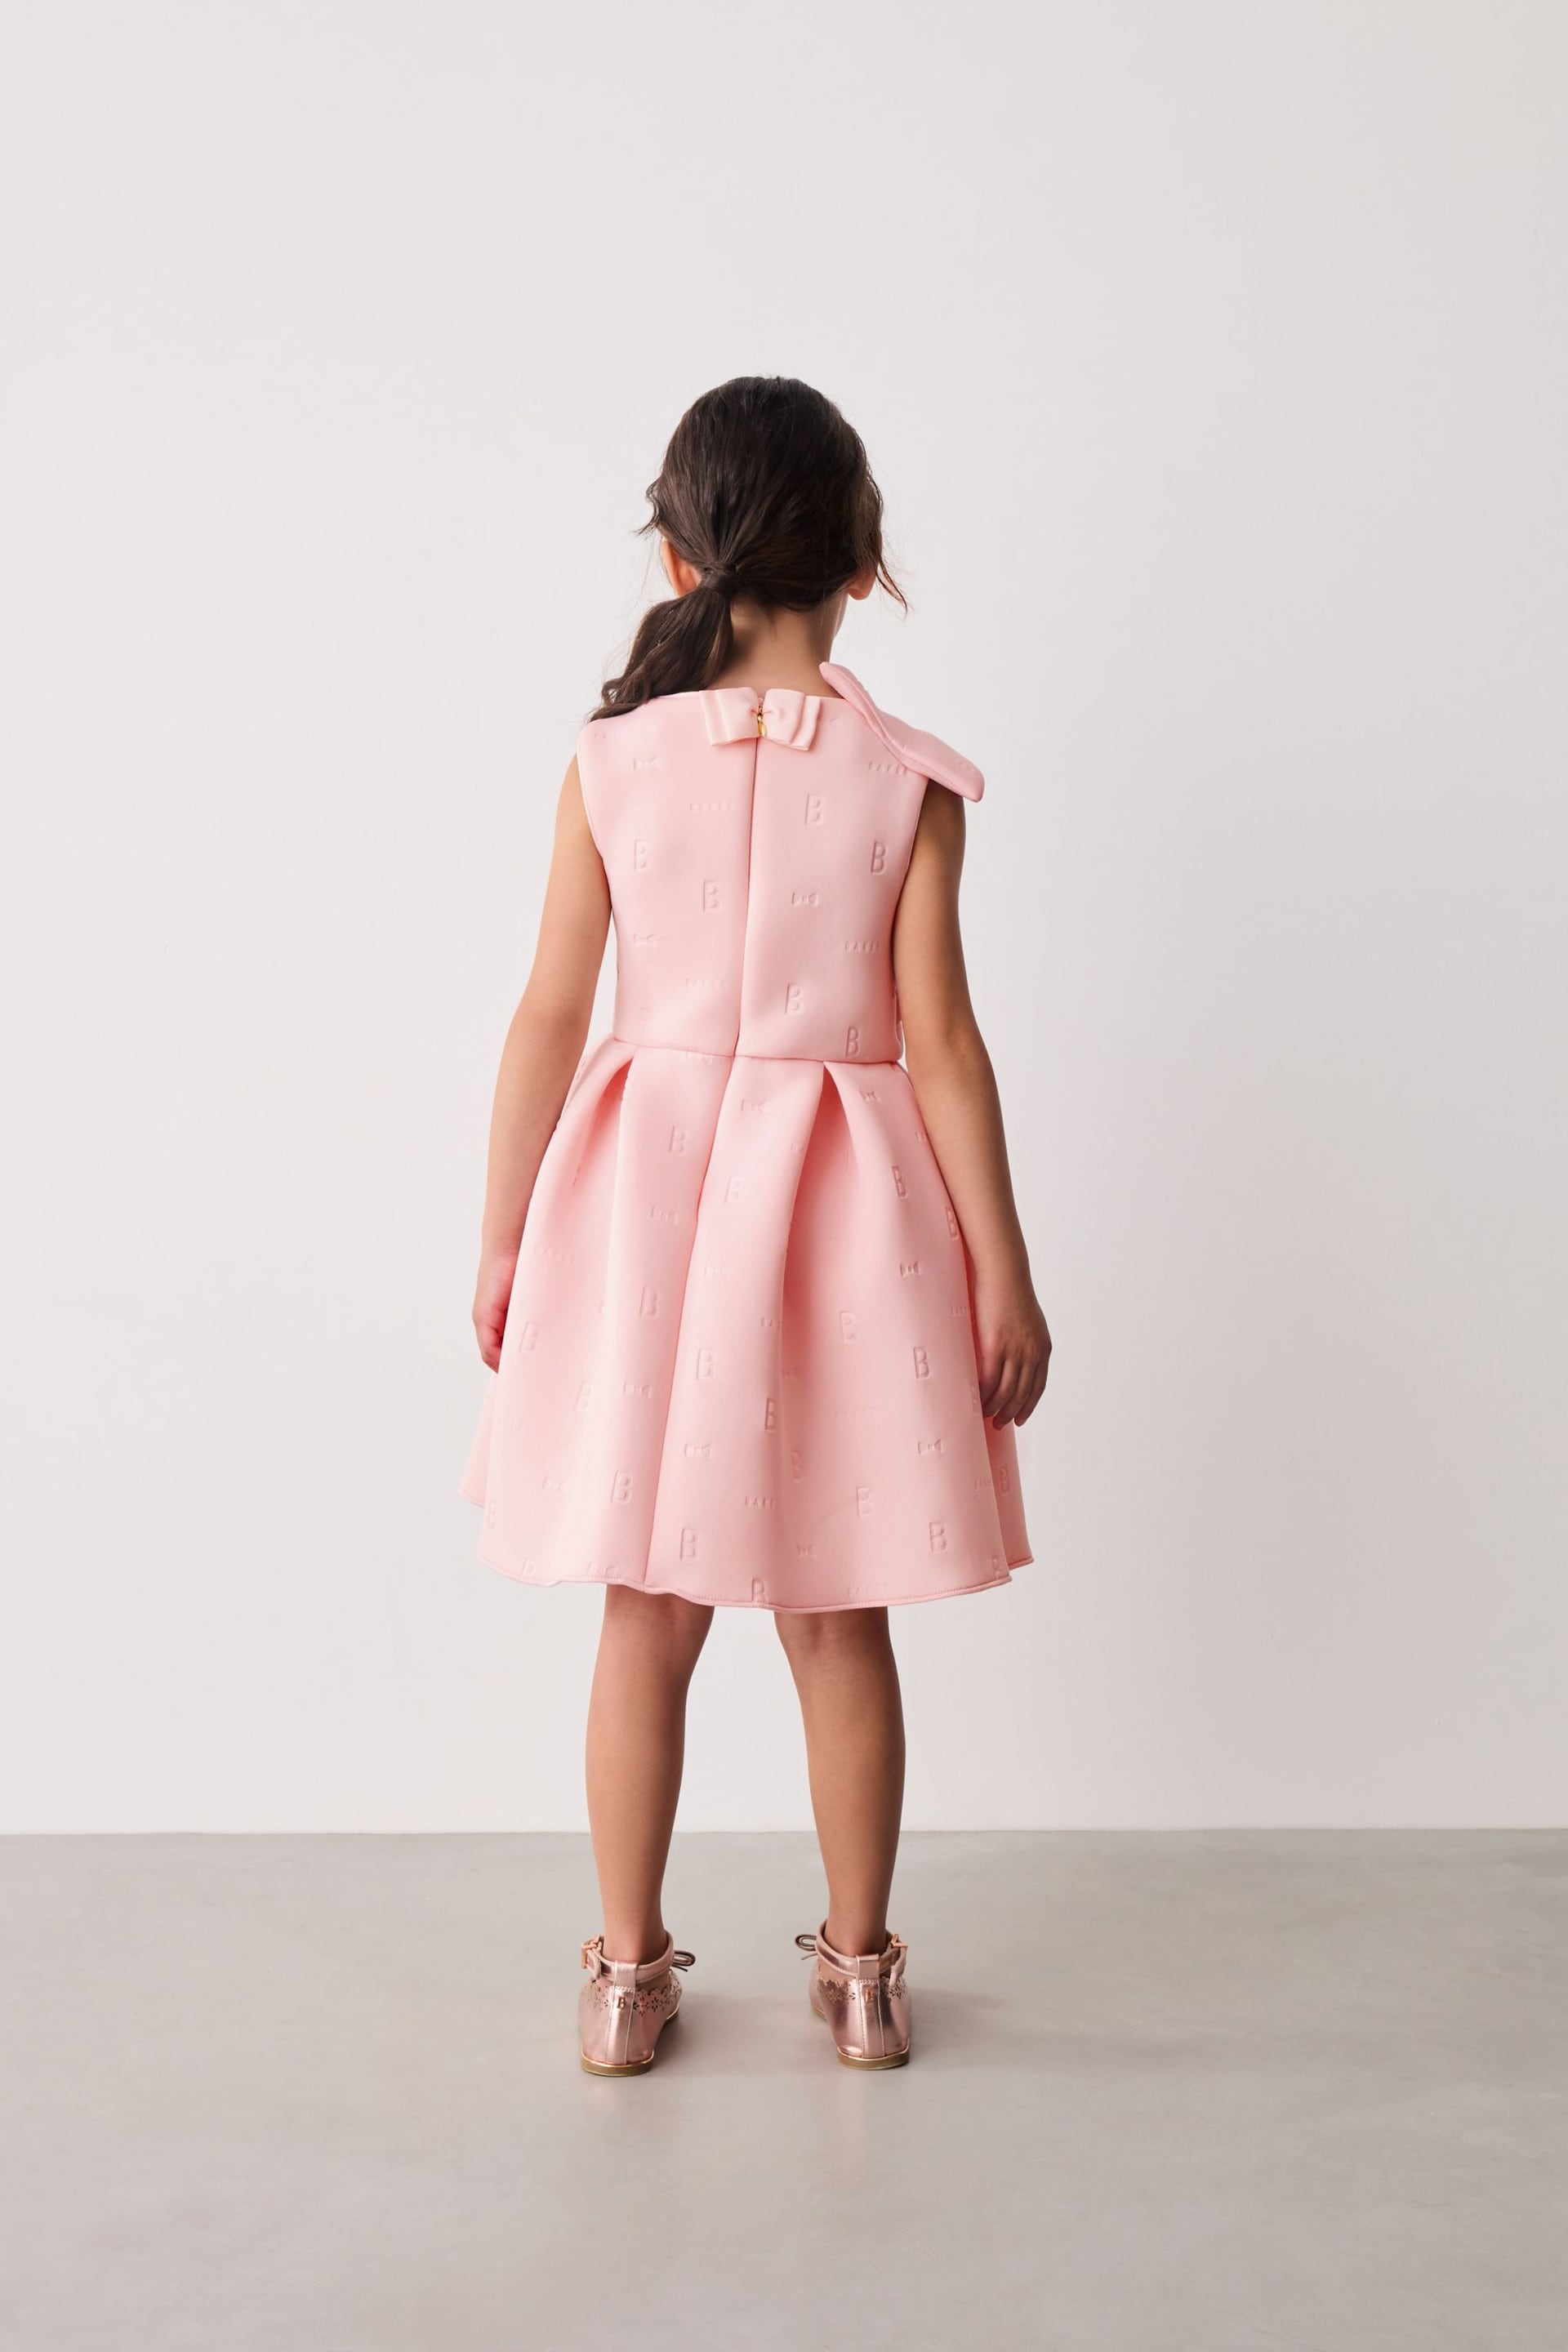 Baker by Ted Baker Bow Embossed Scuba Pink Dress - Image 2 of 11